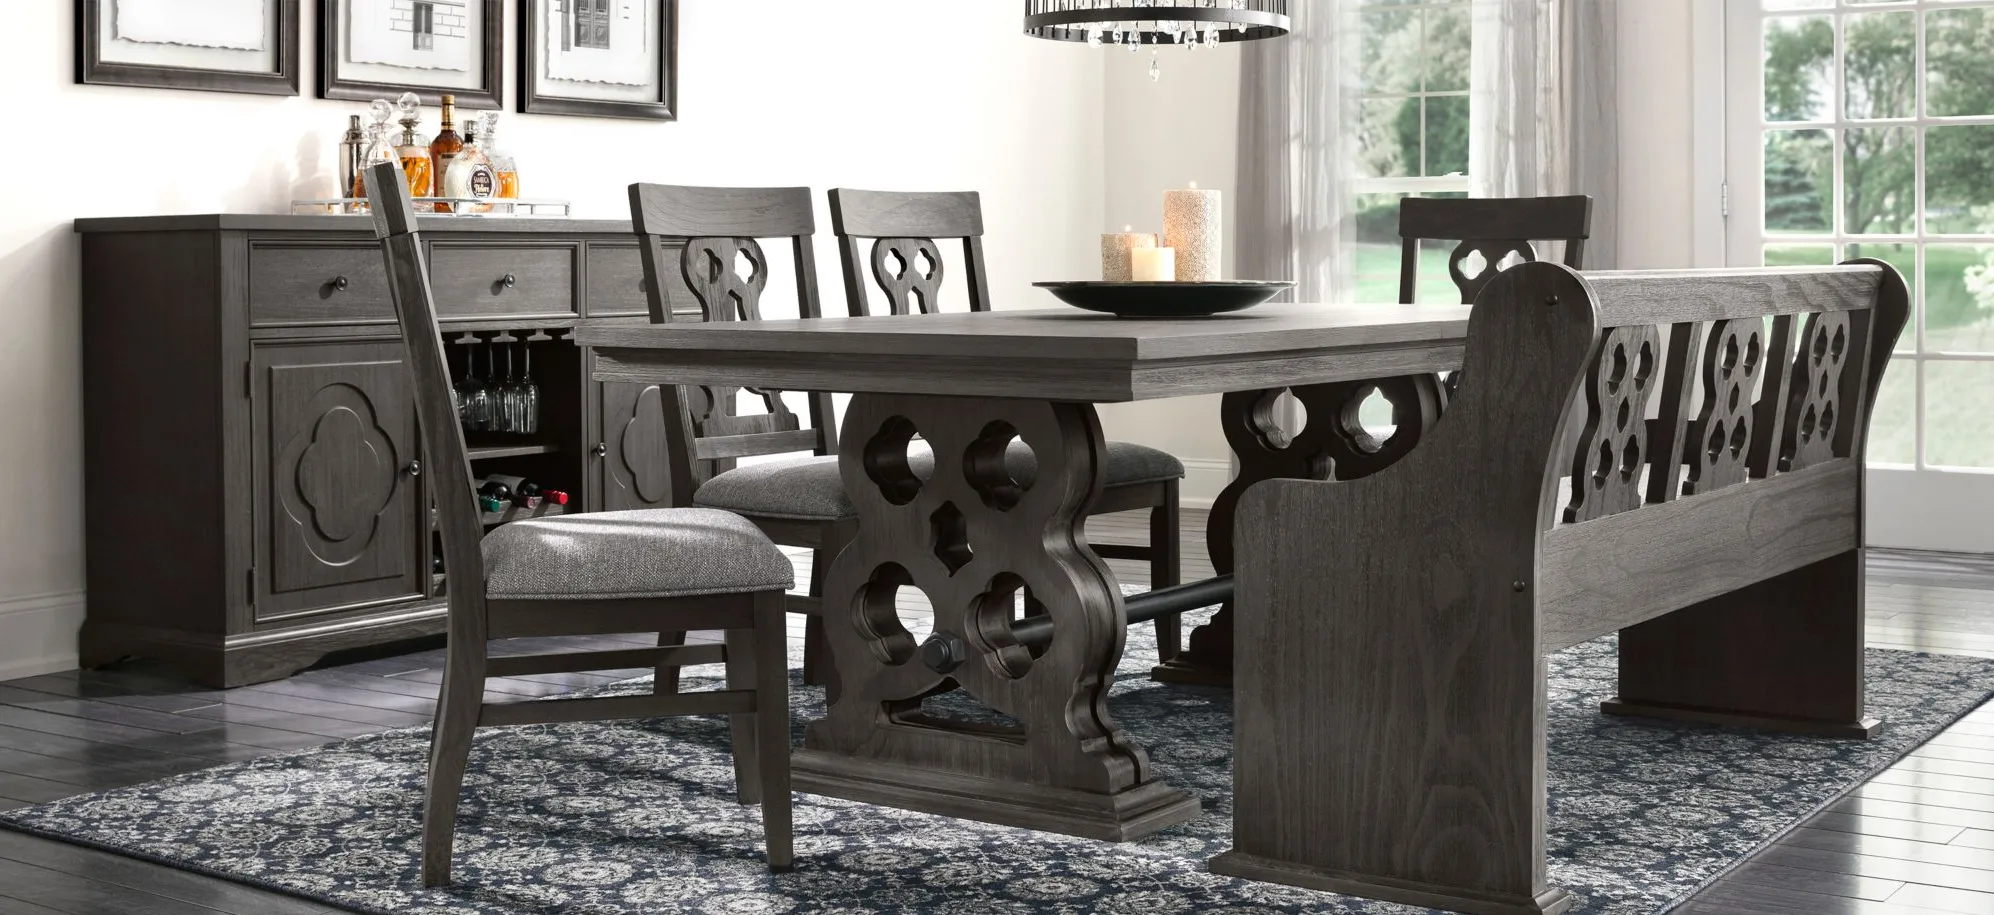 Belmore 6-pc Dining Set W/Bench in Gray / Espresso by Homelegance